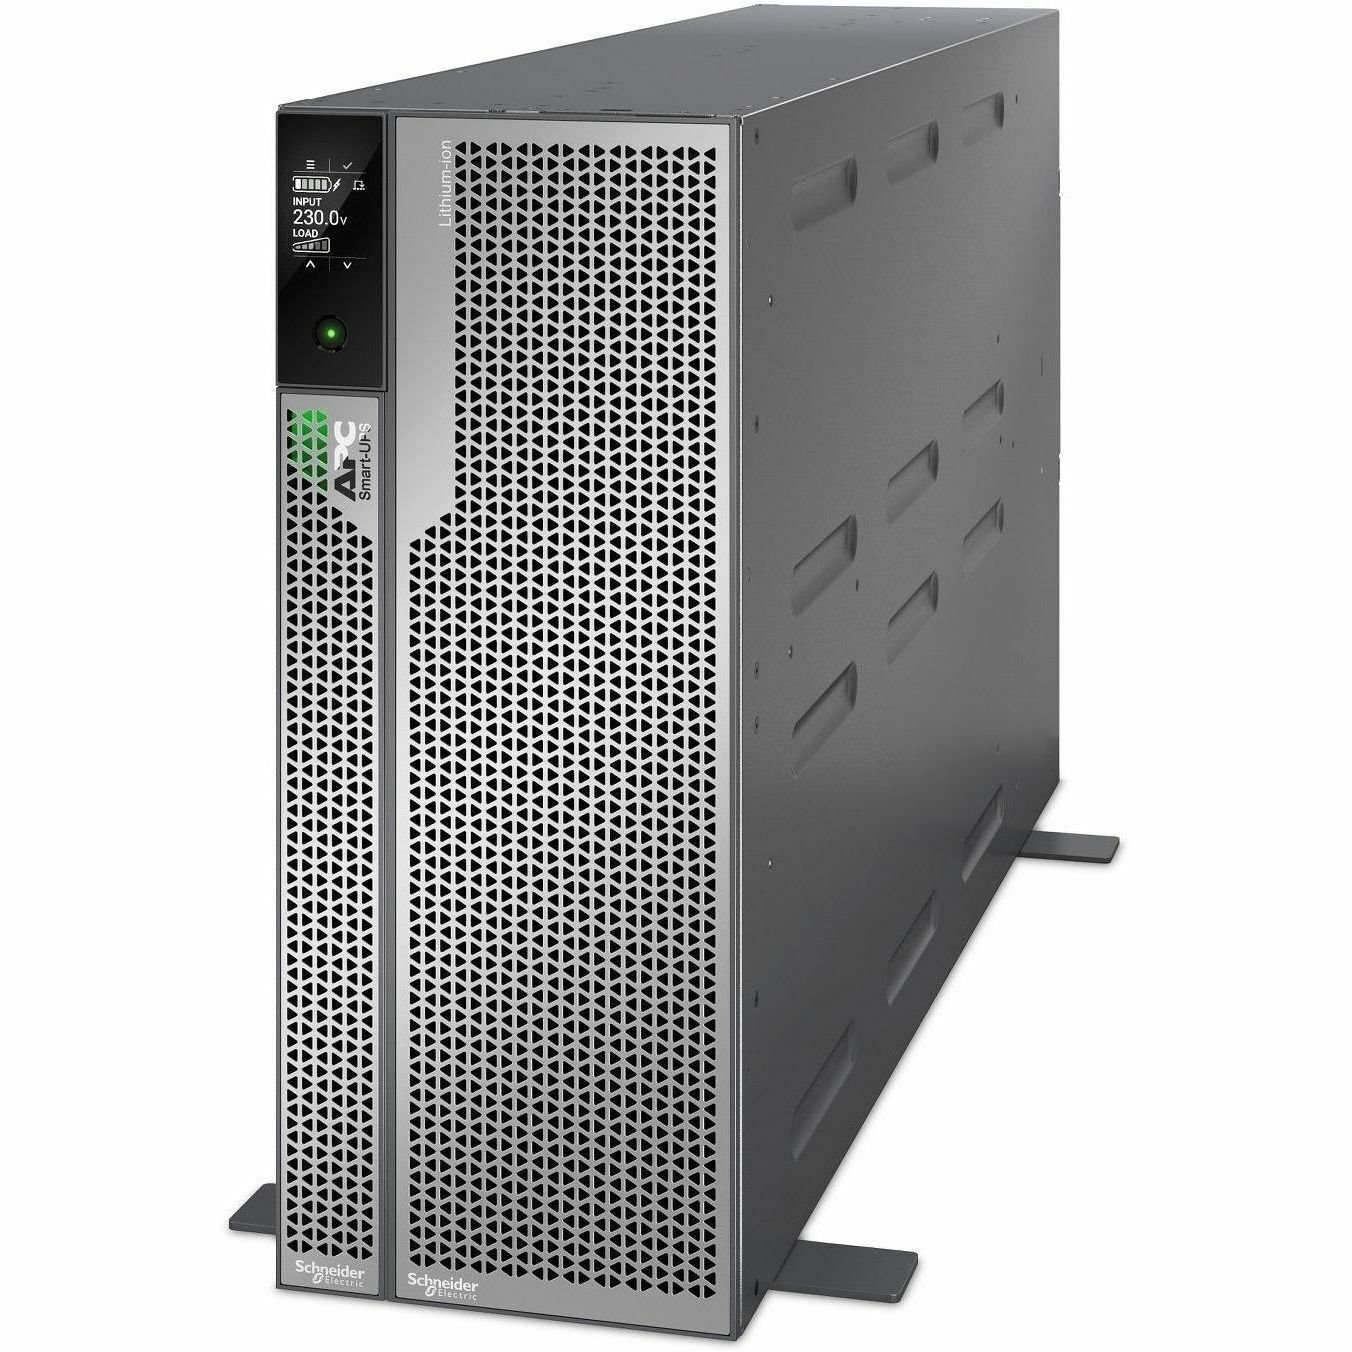 APC by Schneider Electric Smart-UPS On-Line Double Conversion Online UPS - 10 kVA/10 kW - Single Phase